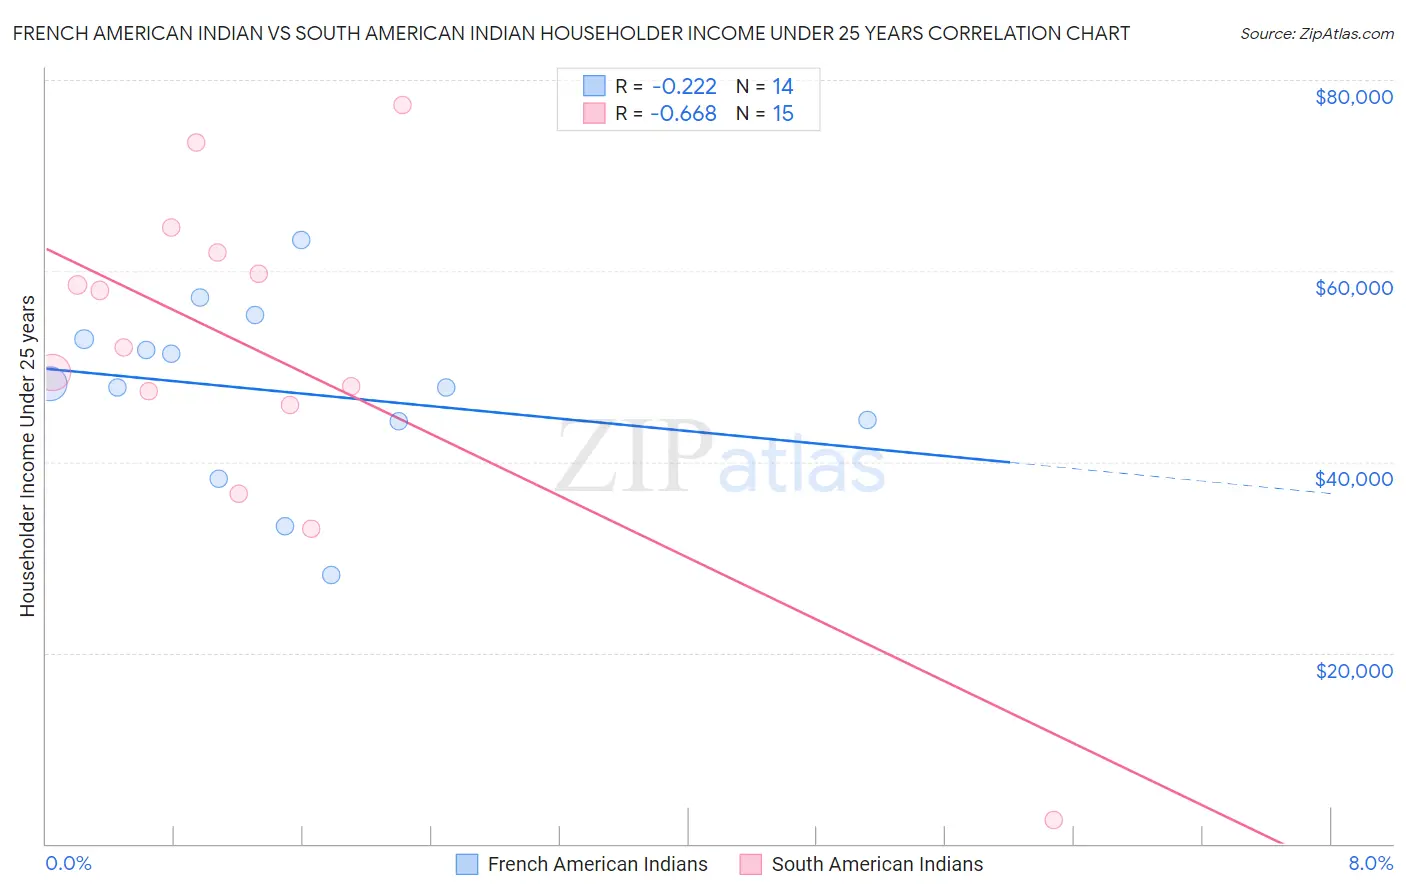 French American Indian vs South American Indian Householder Income Under 25 years